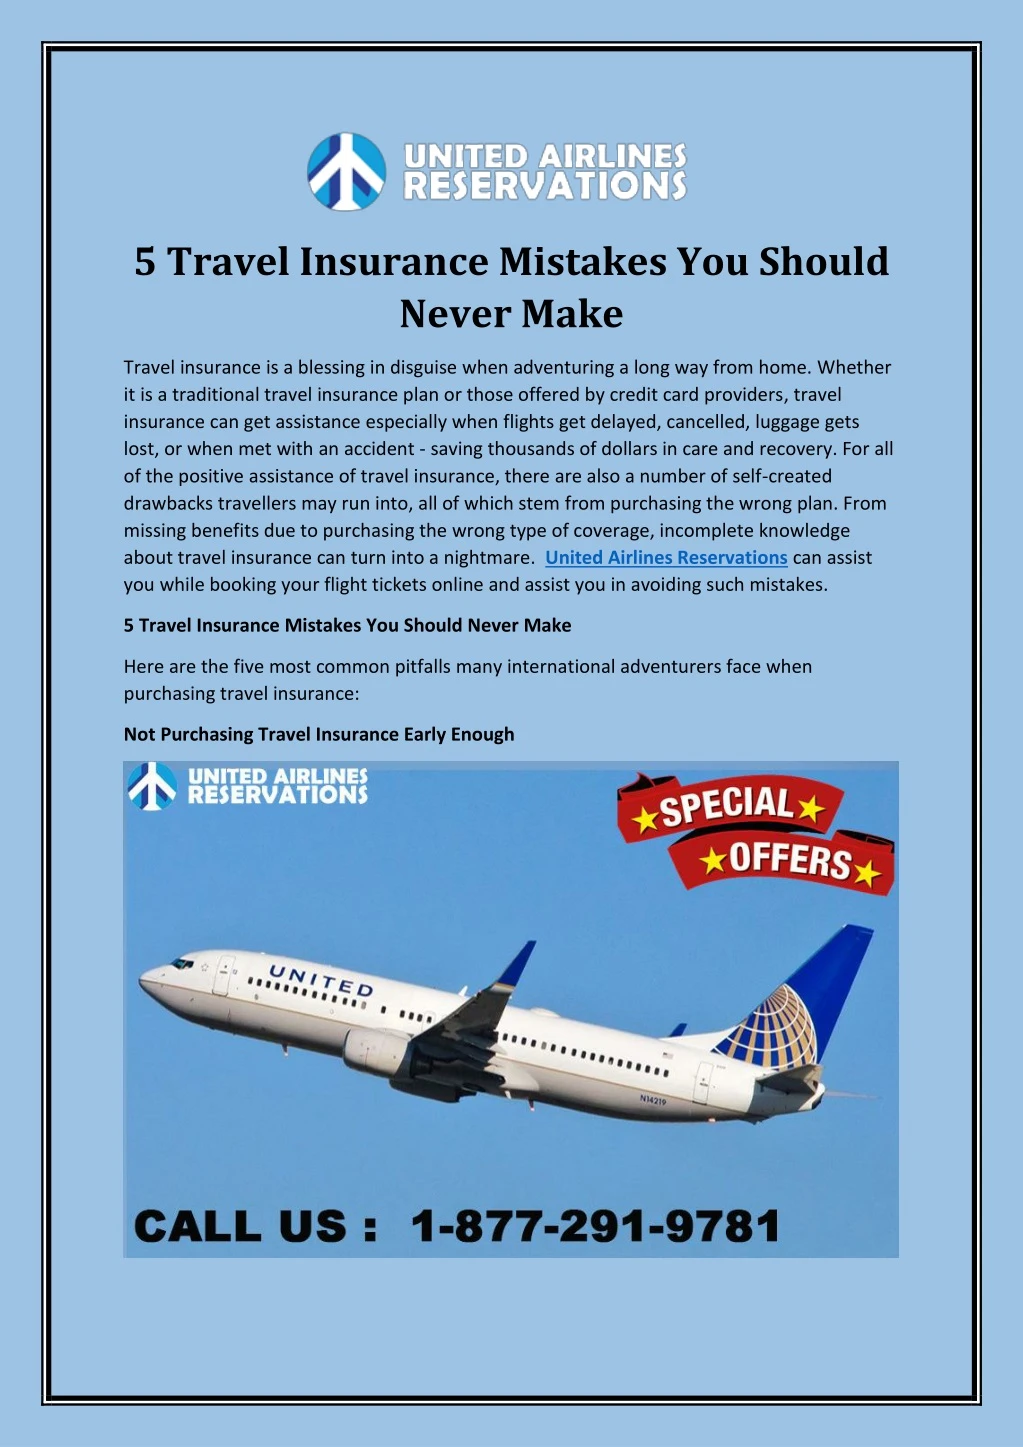 5 travel insurance mistakes you should never make